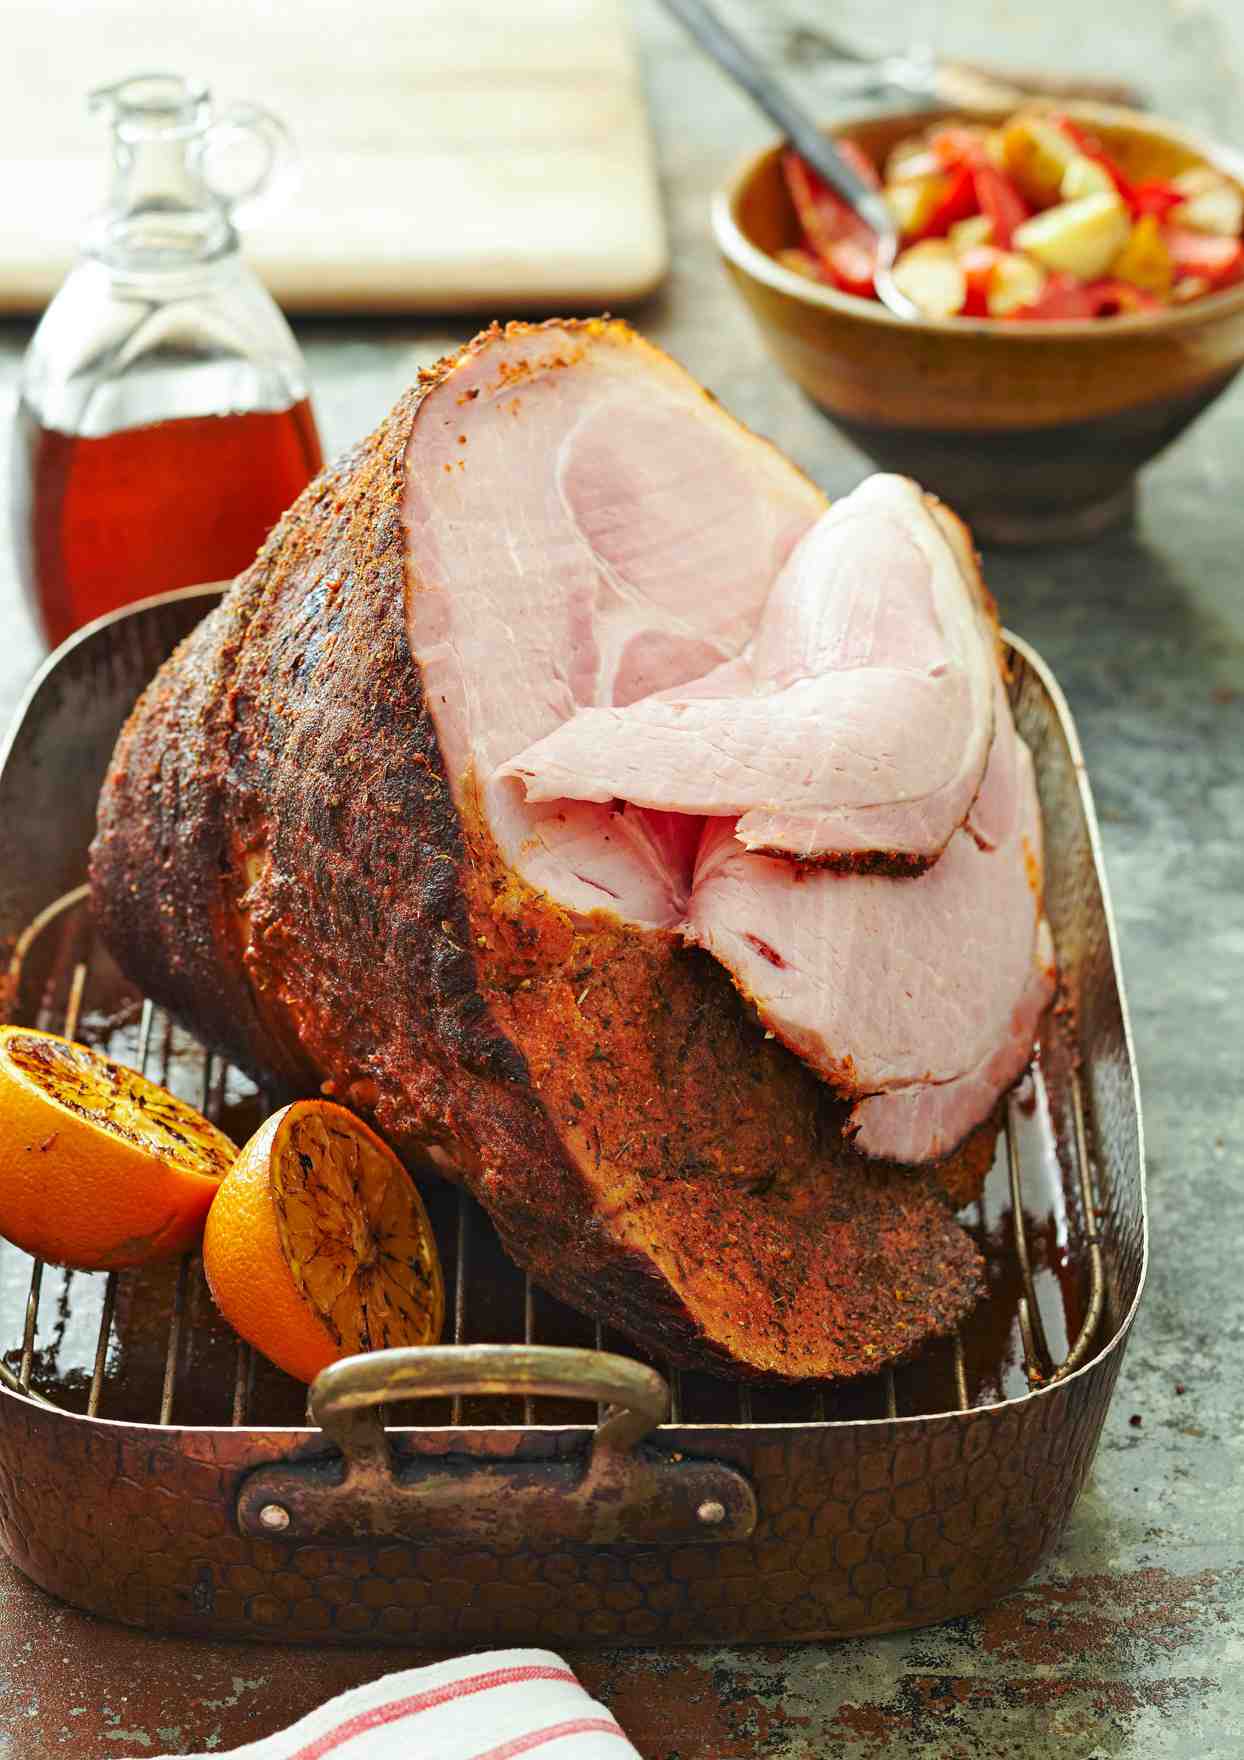 Is a smoked ham already cooked?